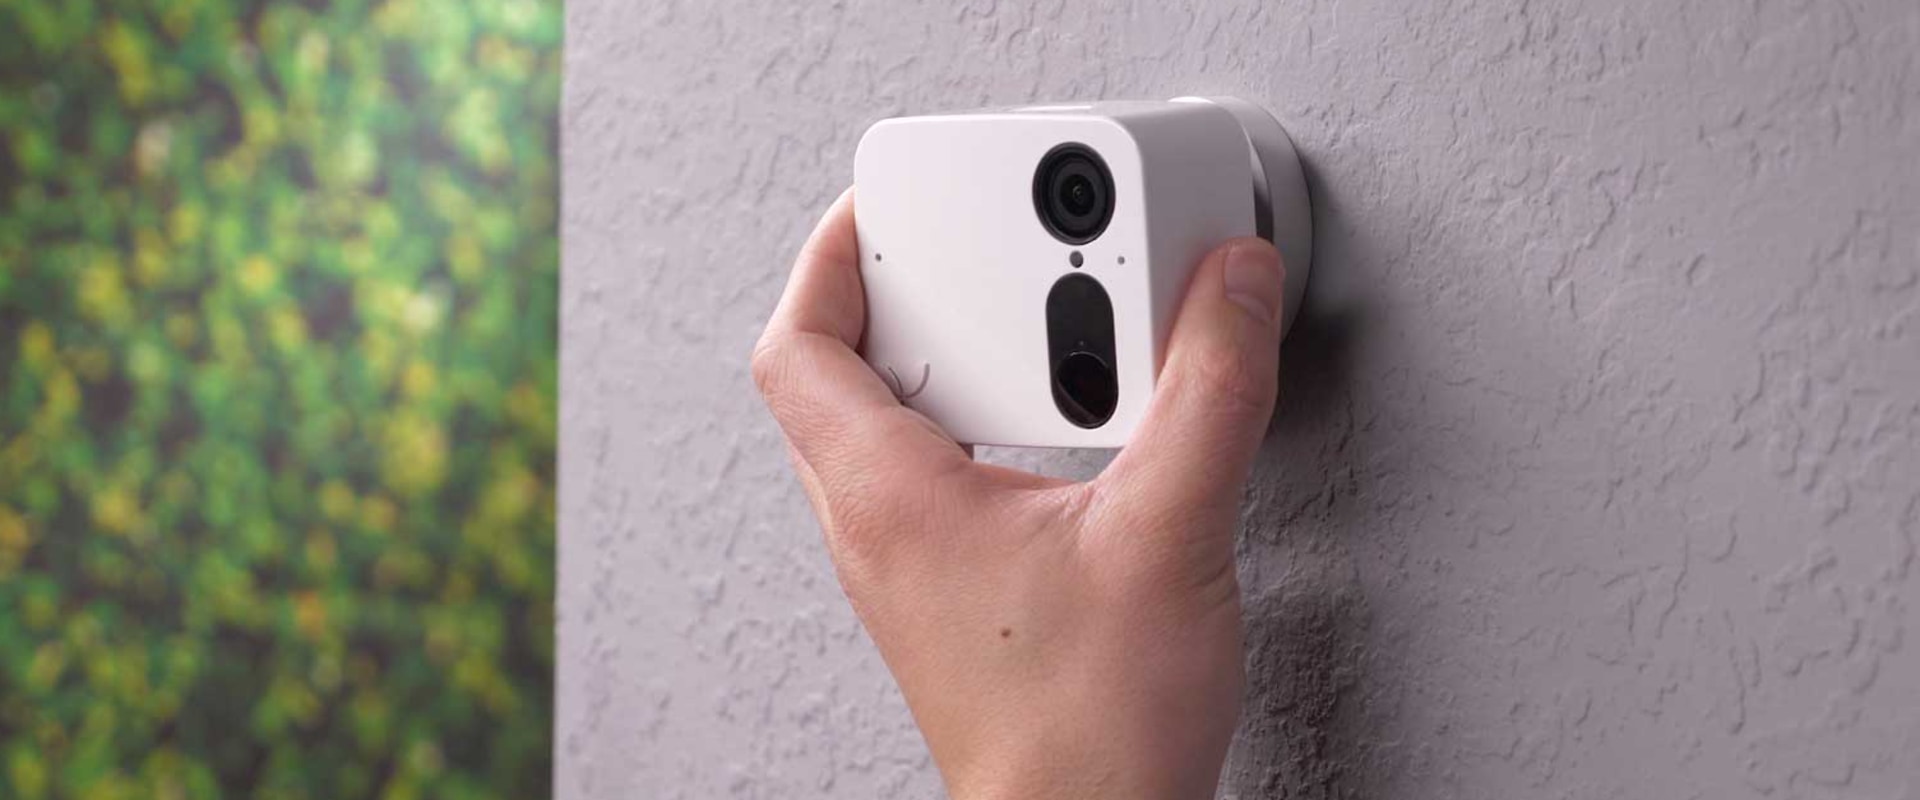 The Importance of Proper Camera Angles for Home and Business Security